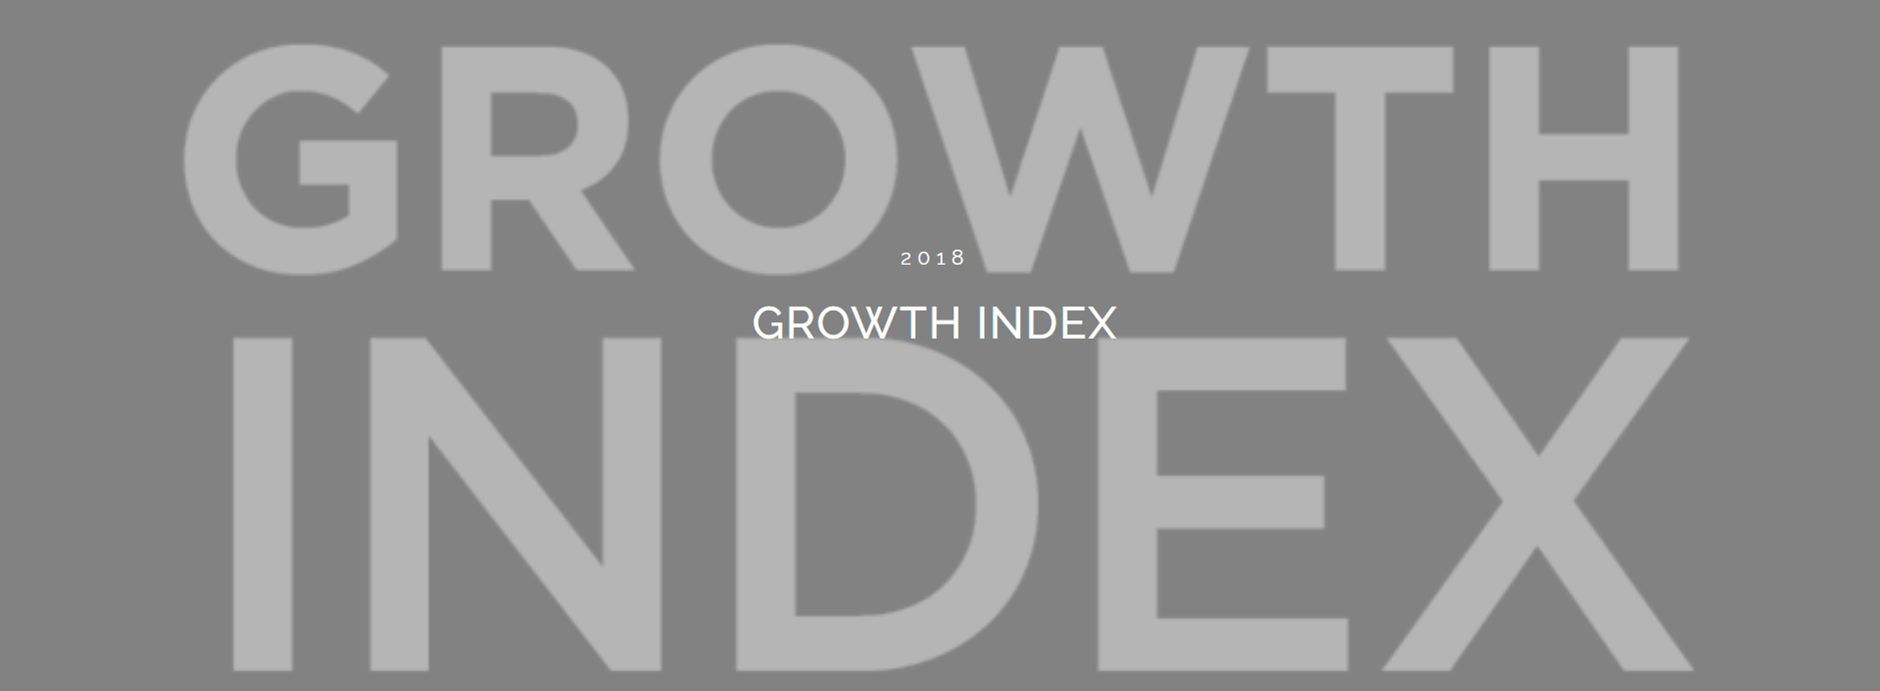 Are you a Fast Grower? Introducing Our 2018 Growth Index